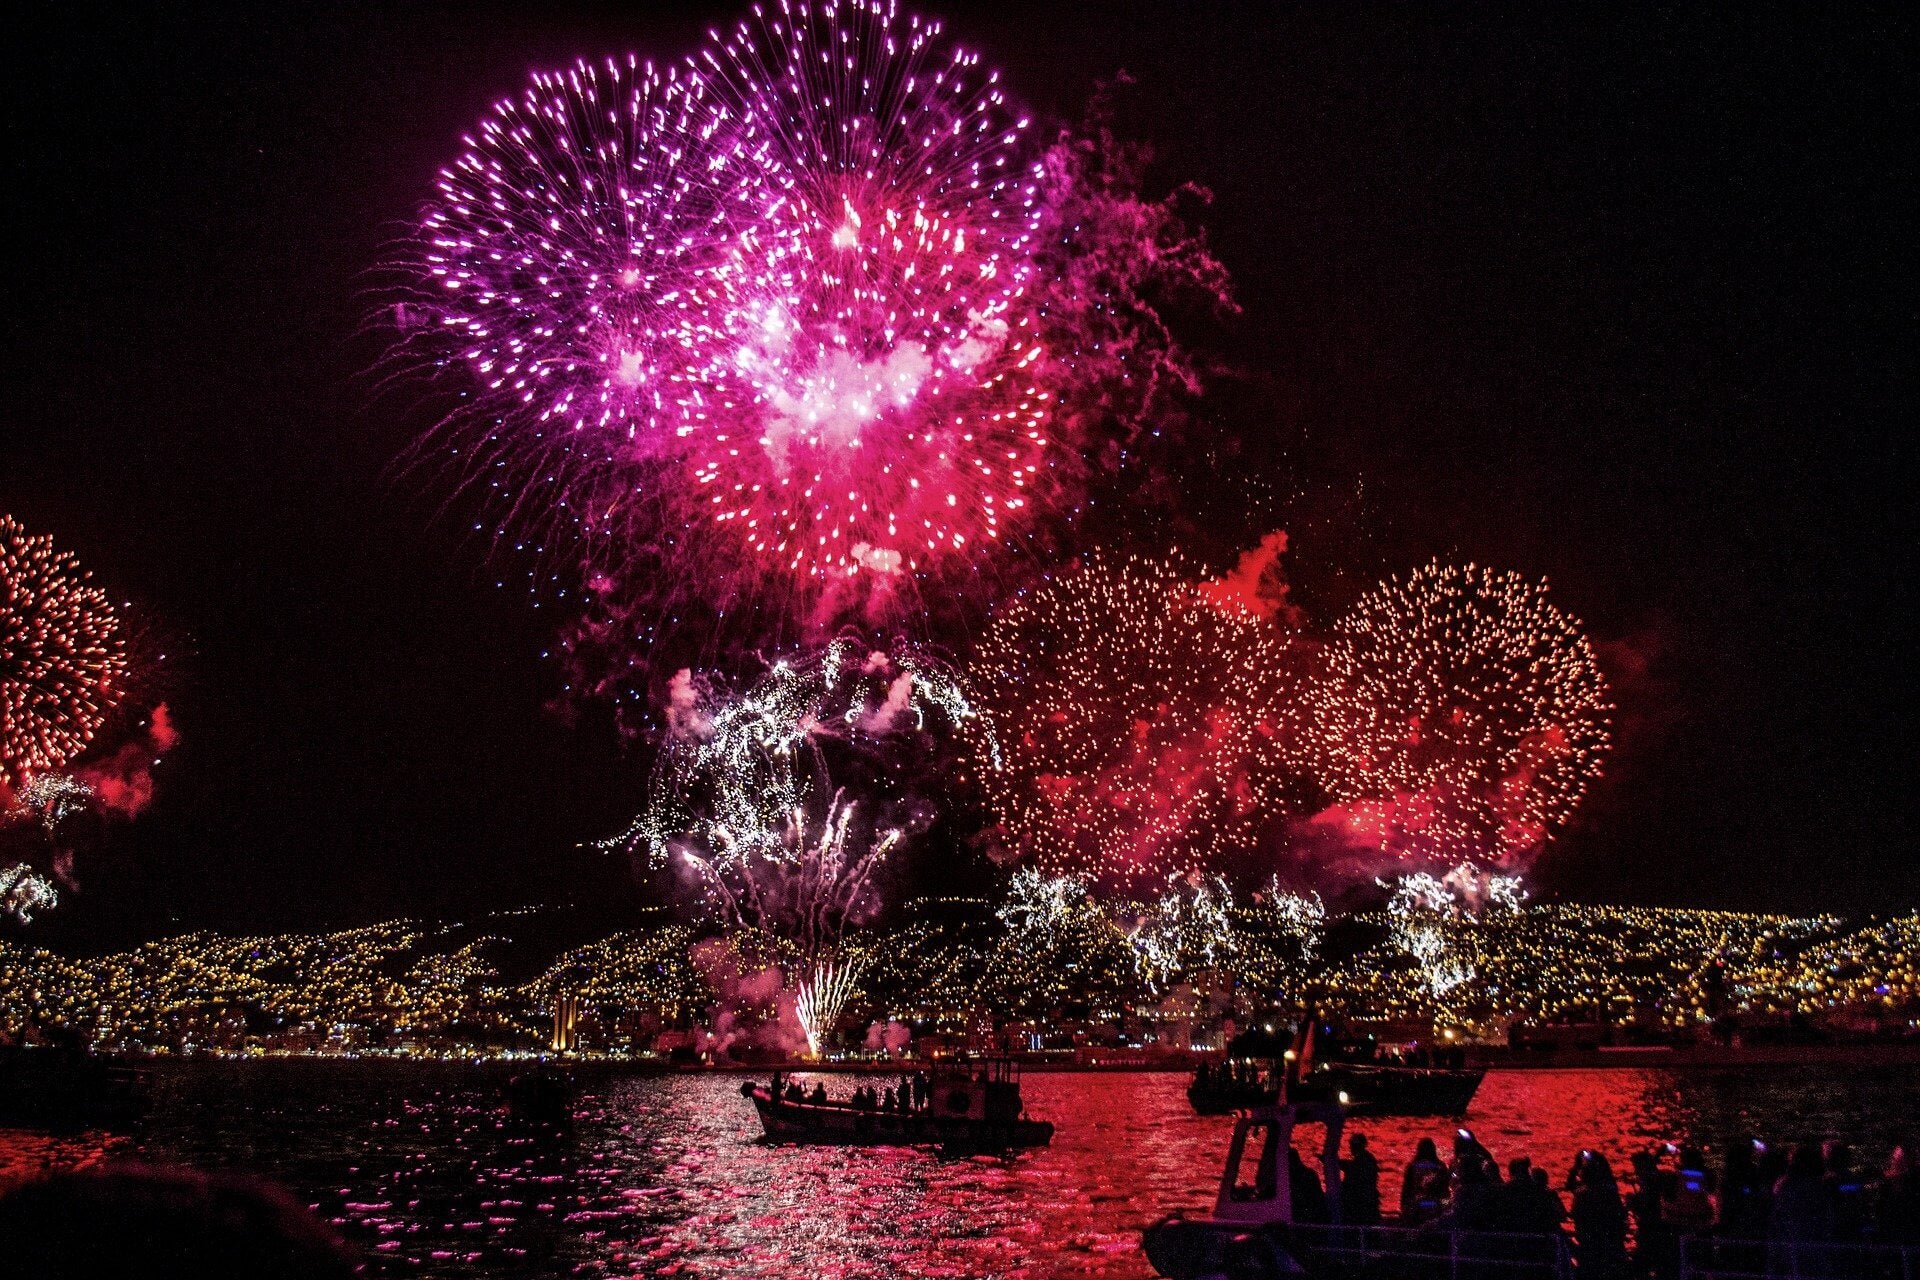 How to Plan a Fireworks Display for Your Event - Our Guide